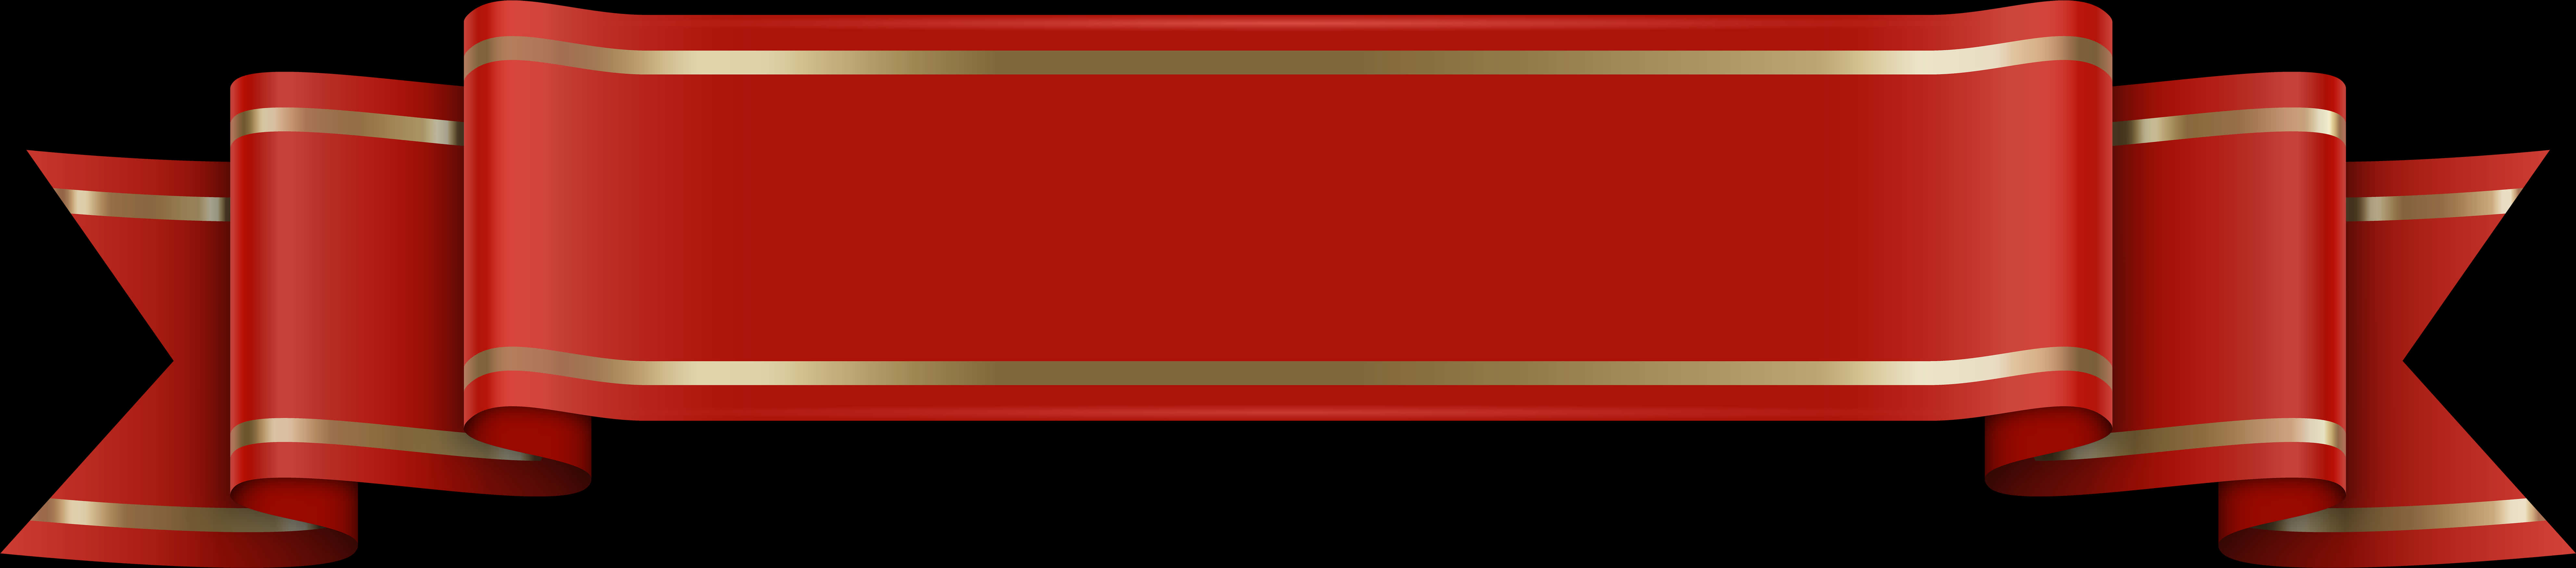 A Red Rectangular Sign With Gold Lines